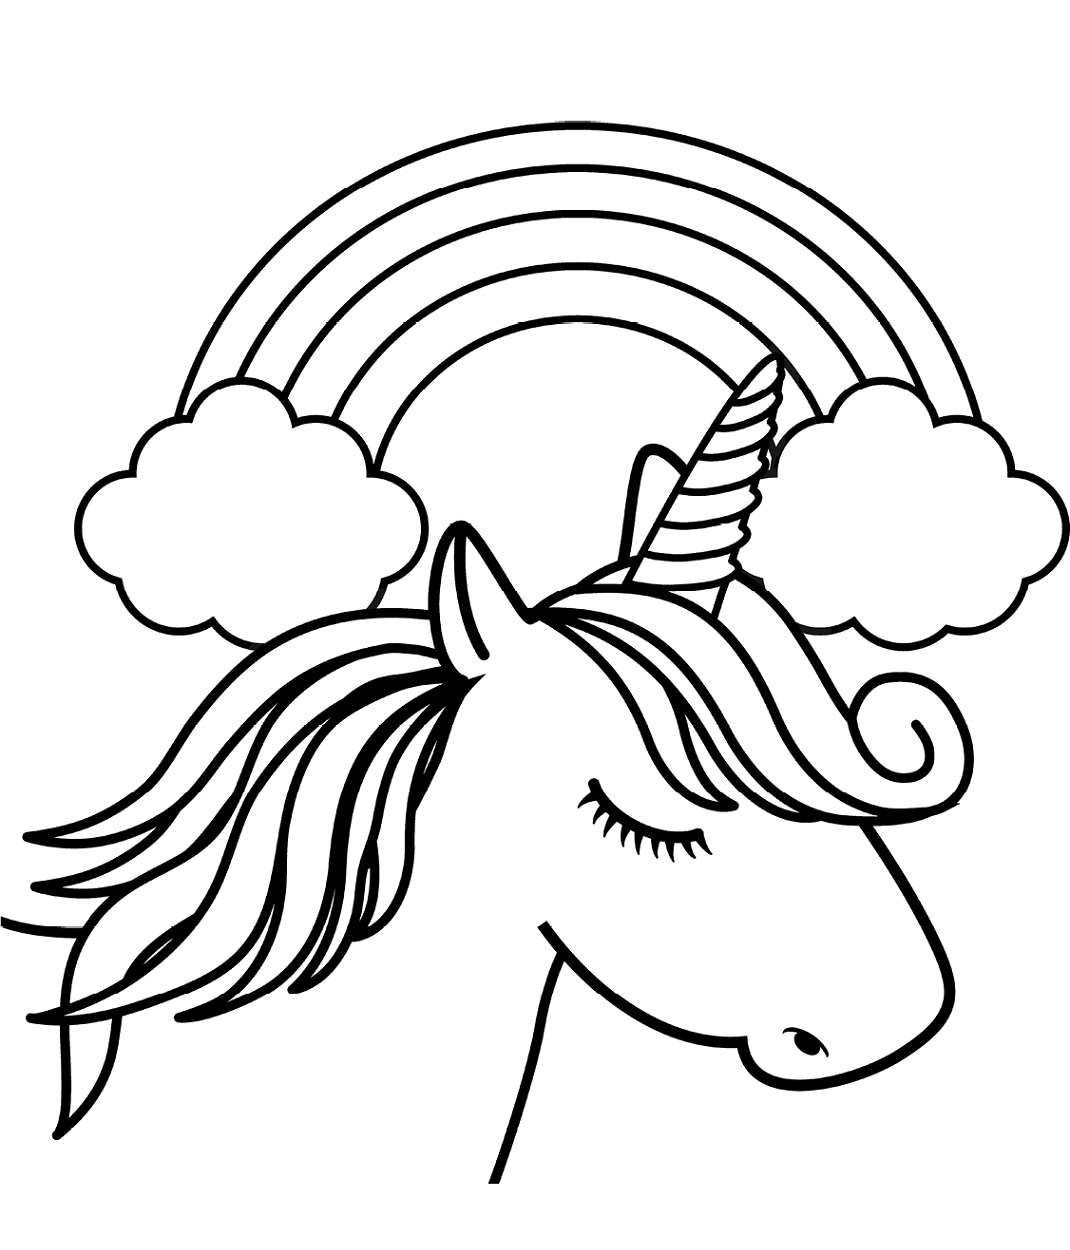 Unicorn Head In Front Of Rainbow Coloring Page - Free Printable ...